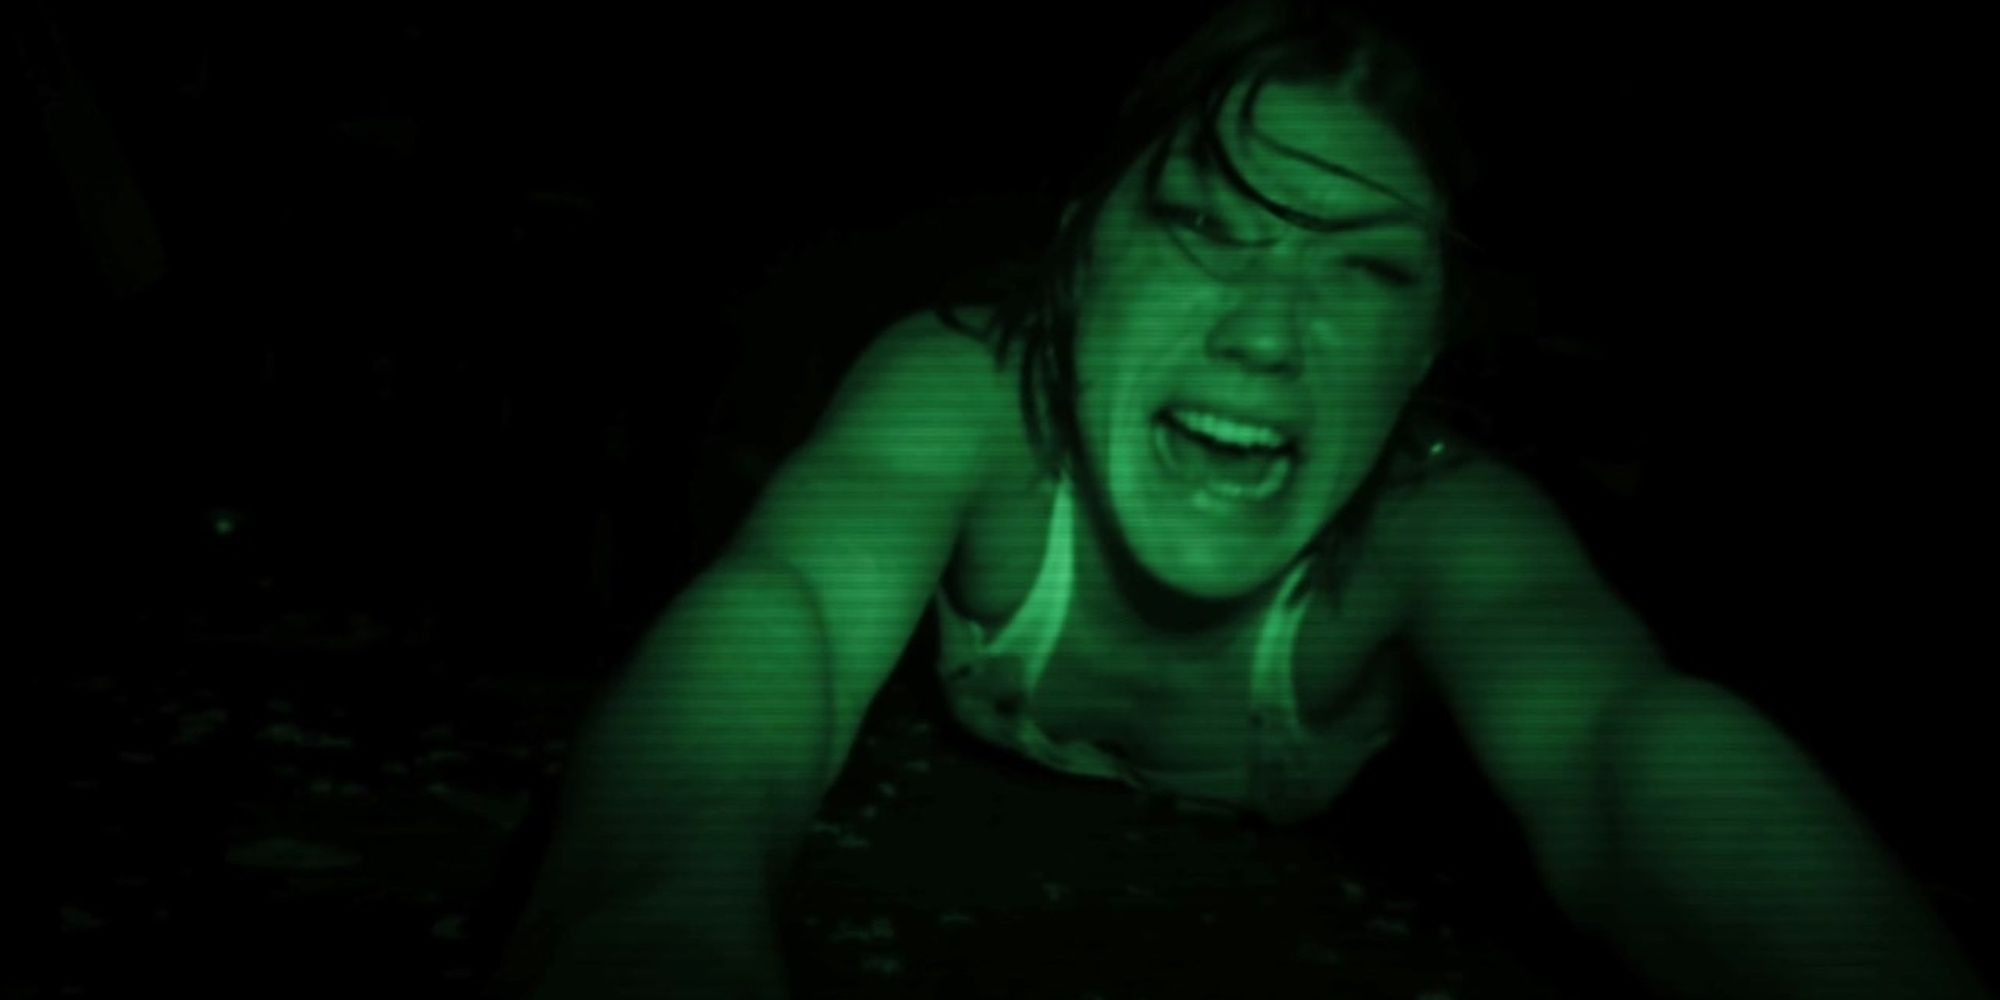 Jennifer Carpenter being dragged away through the lens of a camera's night vision mode in Quarantine